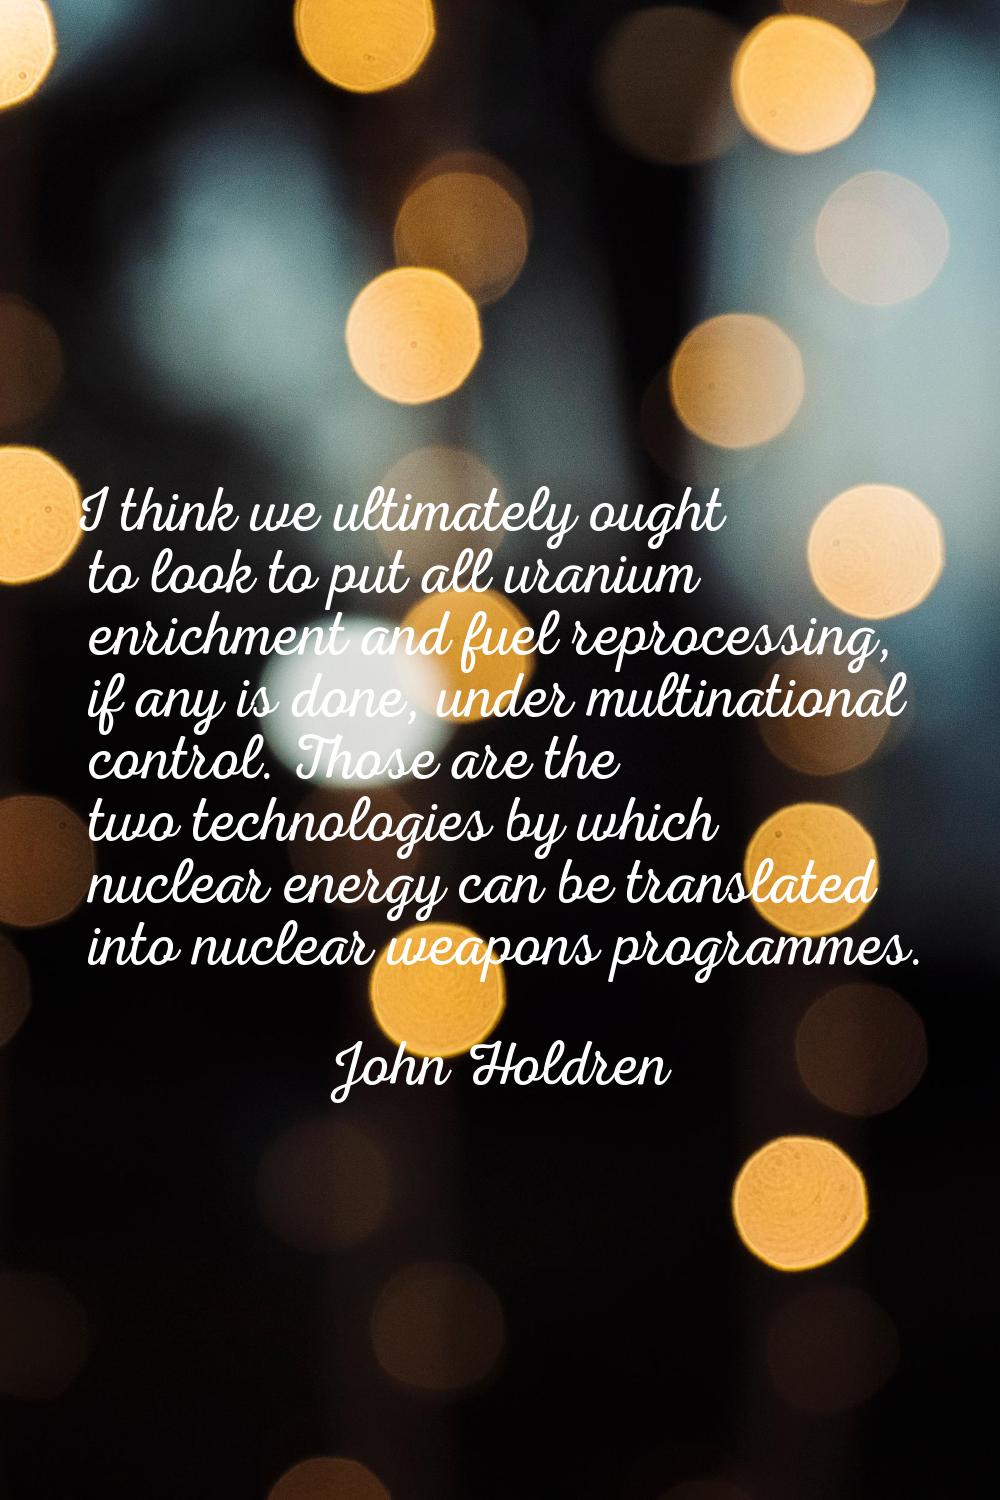 I think we ultimately ought to look to put all uranium enrichment and fuel reprocessing, if any is 